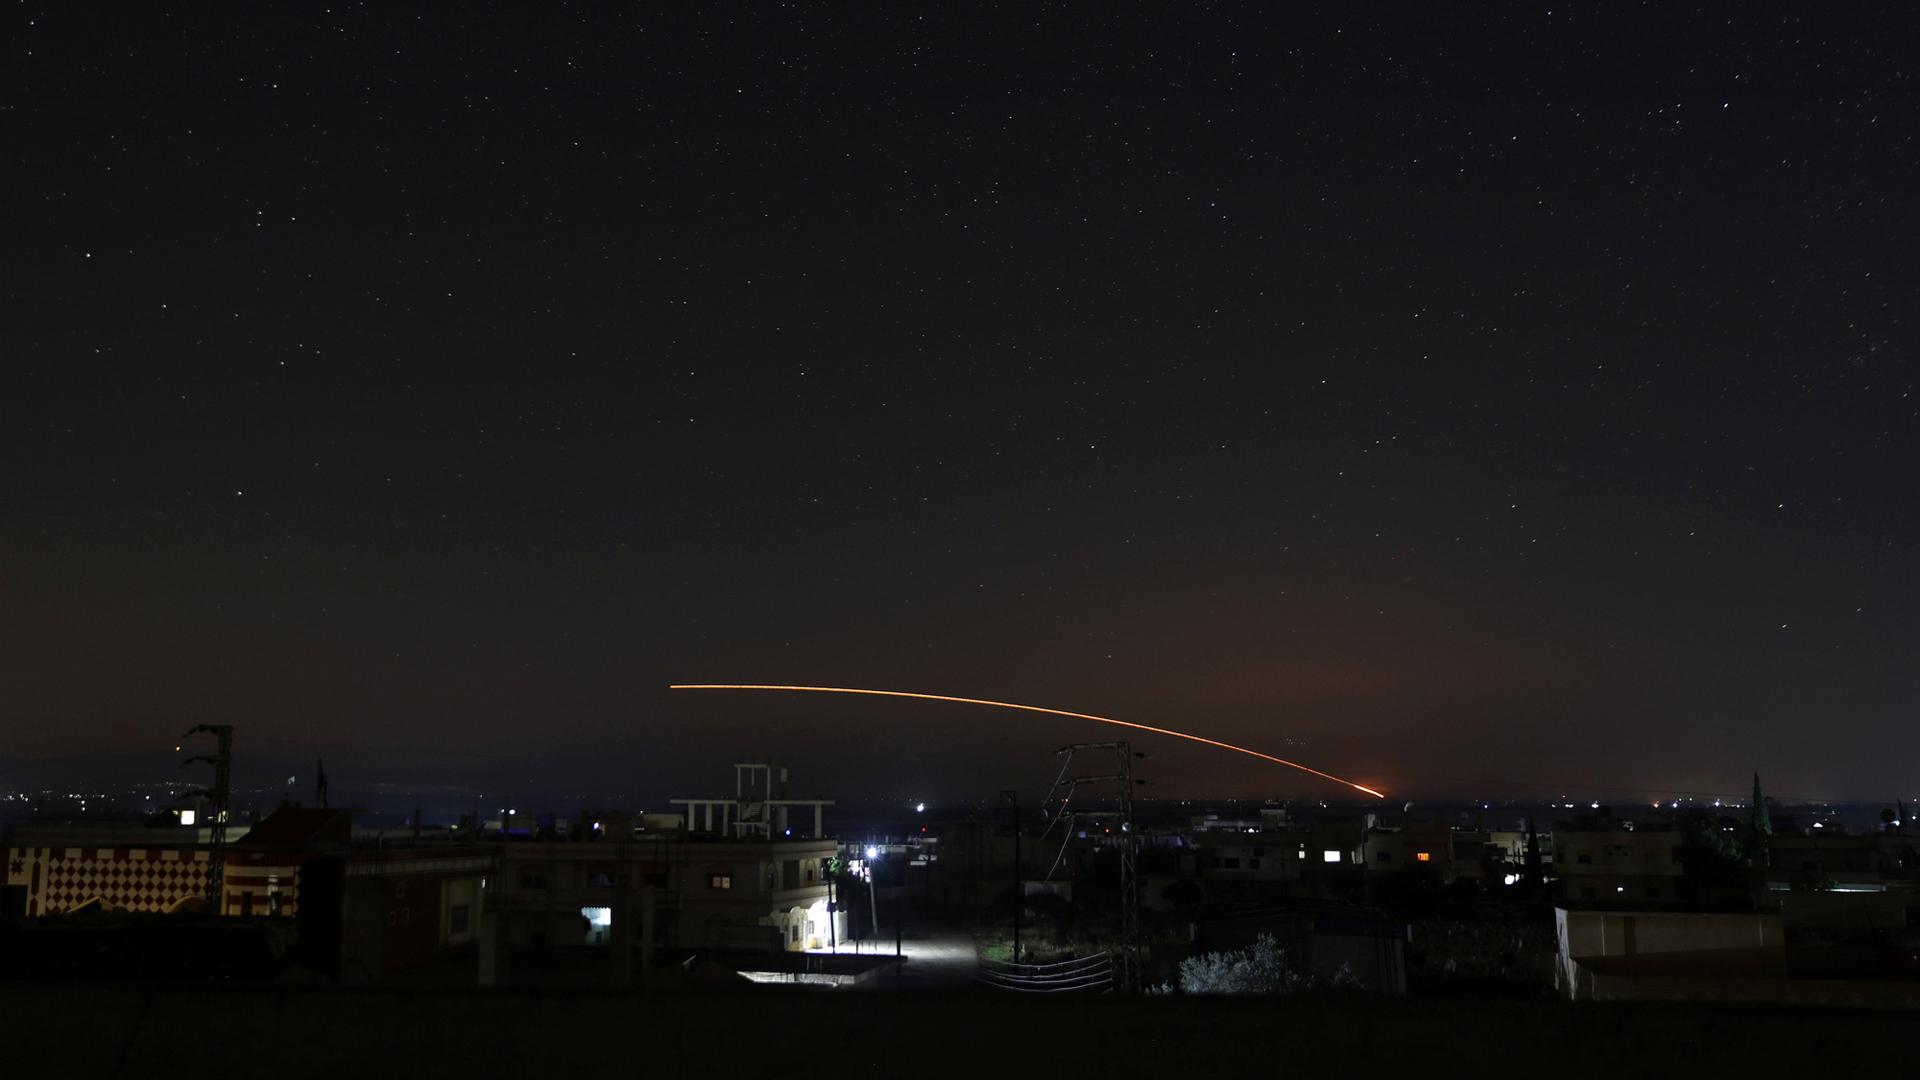 Missile fire is seen in a yellow streak across the night sky over Daraa, Syria.